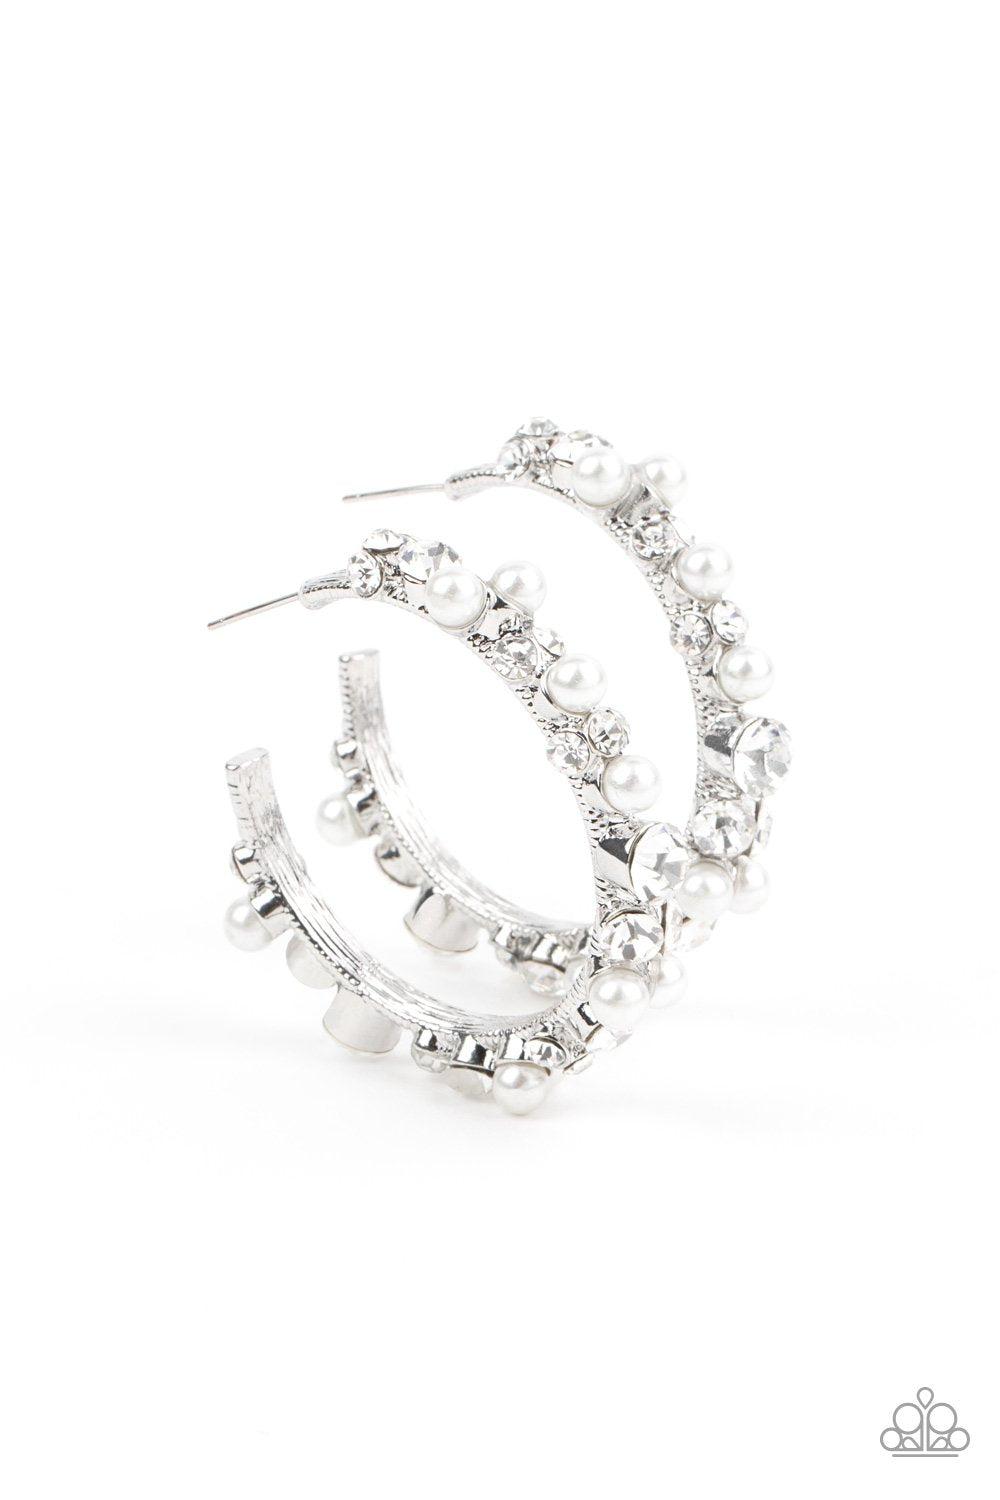 Let There Be SOCIALITE White Pearl and Rhinestone Hoop Earrings - Paparazzi Accessories Life of the Party Exclusive September 2021- lightbox - CarasShop.com - $5 Jewelry by Cara Jewels